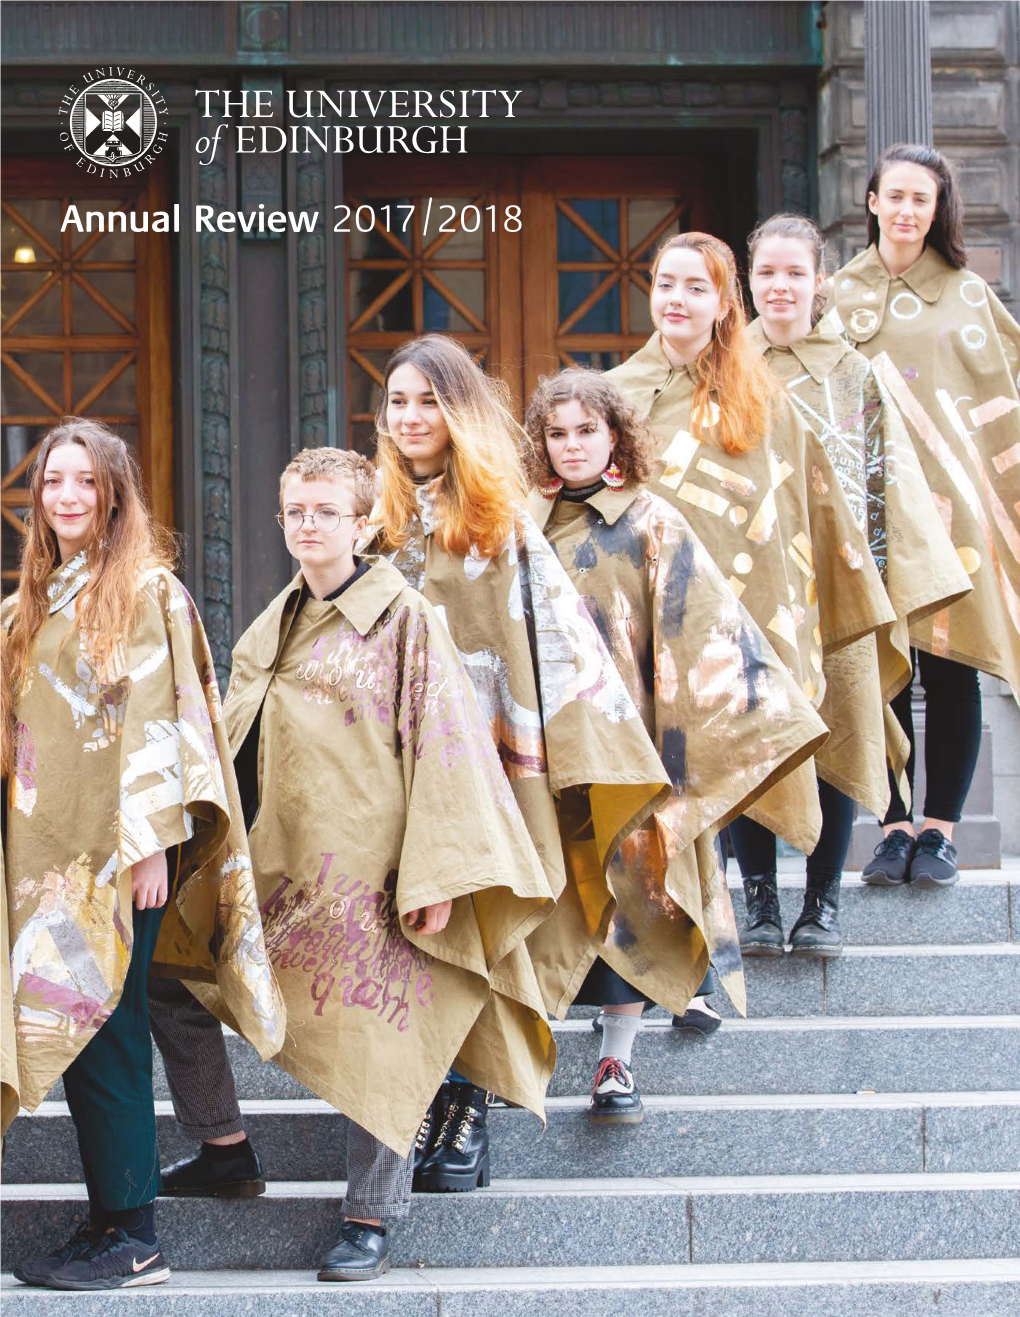 Annual Review 2017/2018 Influencing the World Since 1583